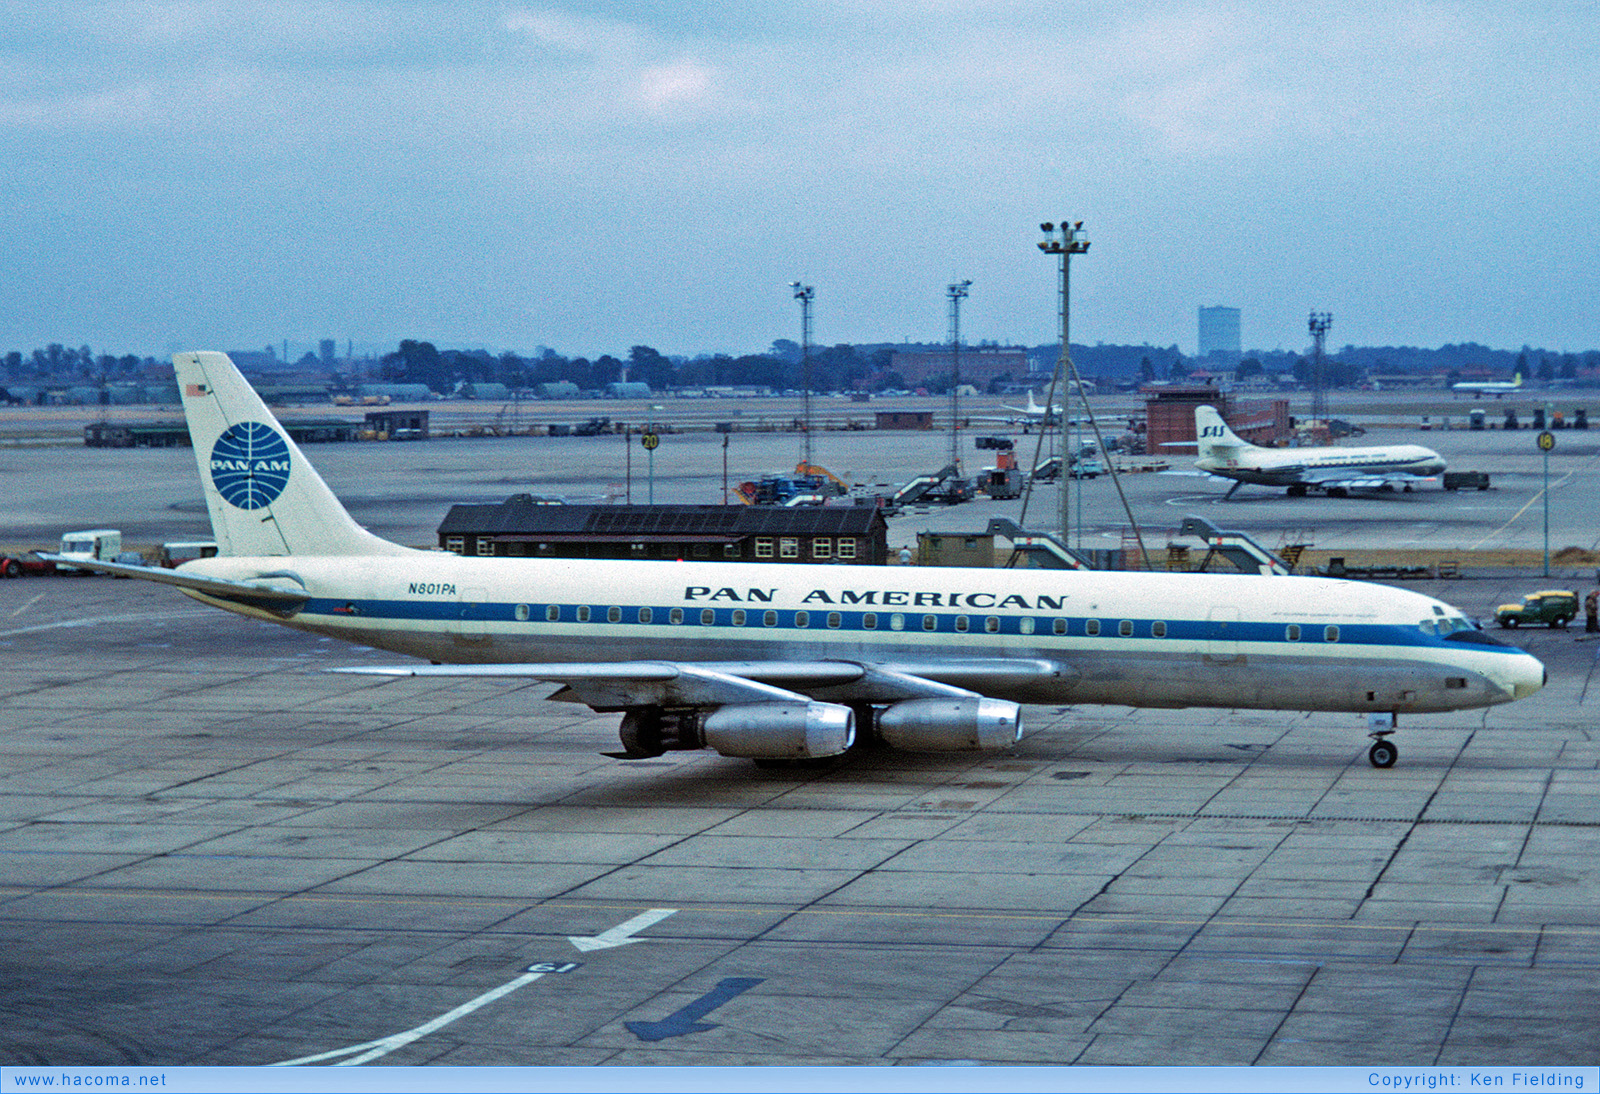 Photo of N801PA - Pan Am Clipper Queen of the Pacific - London Heathrow Airport - Sep 14, 1964